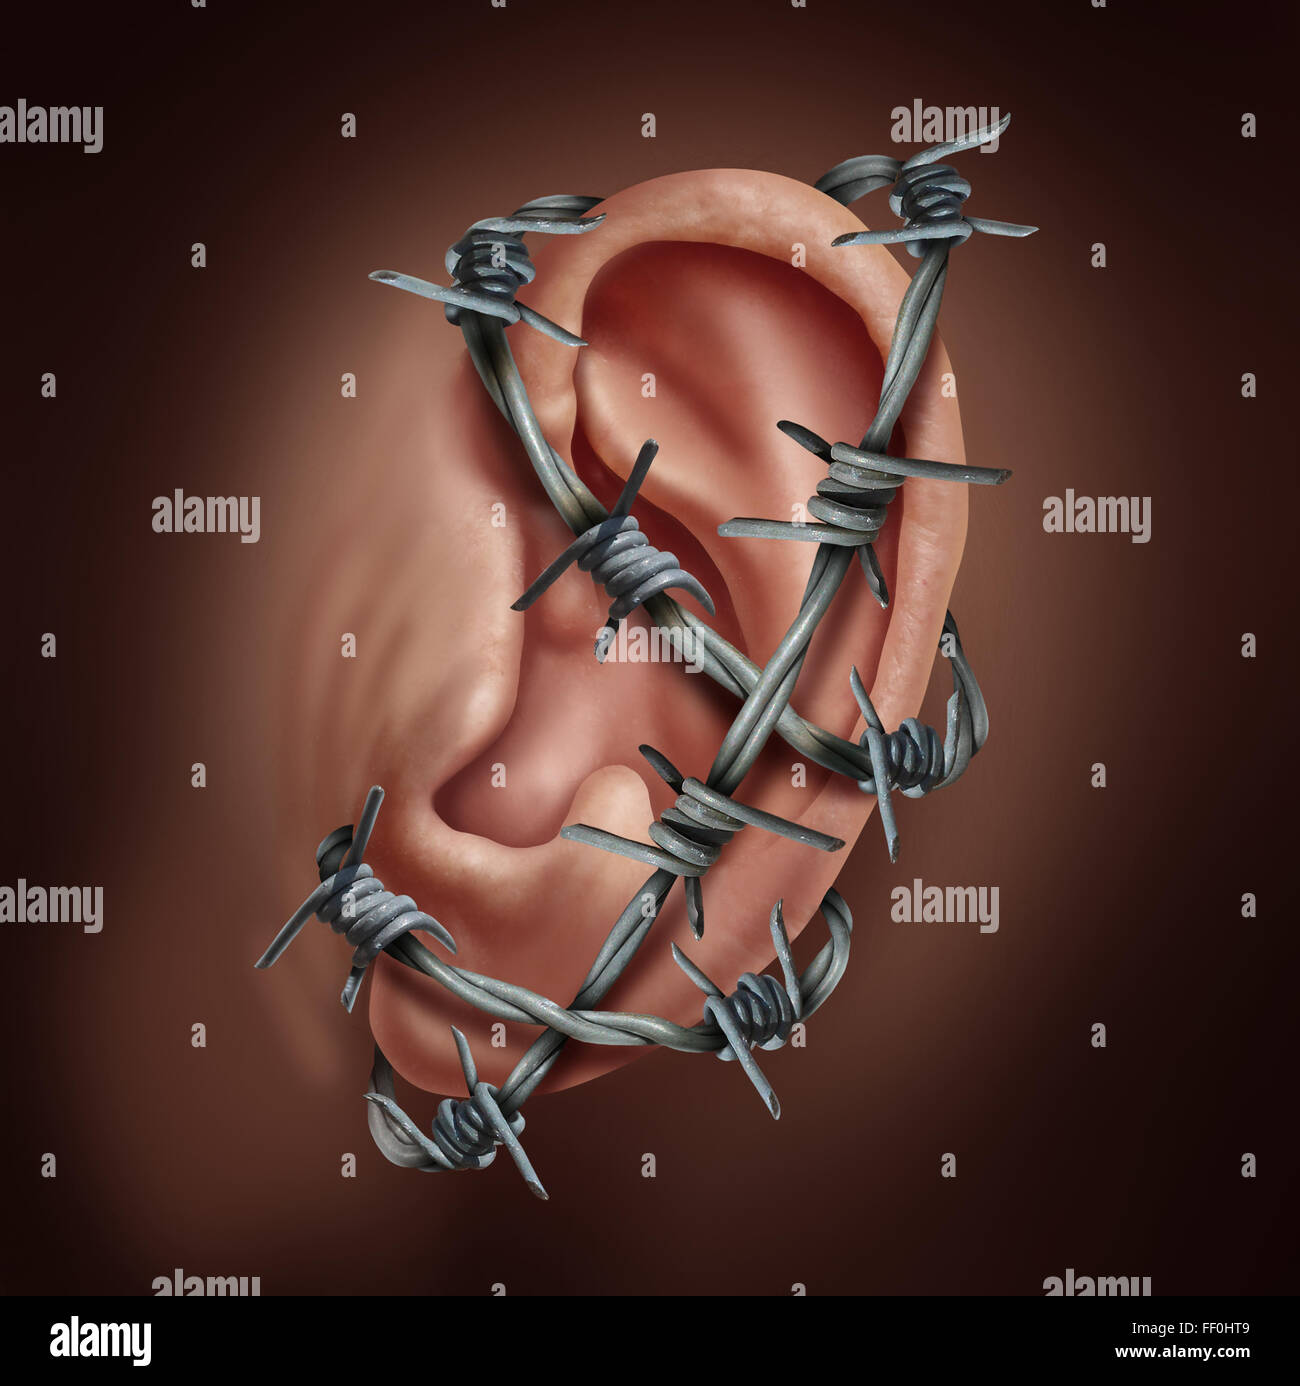 Human ear pain and earache infection symbol as barbed wire wrapped around the hearing body part causing a sharp burning disease Stock Photo